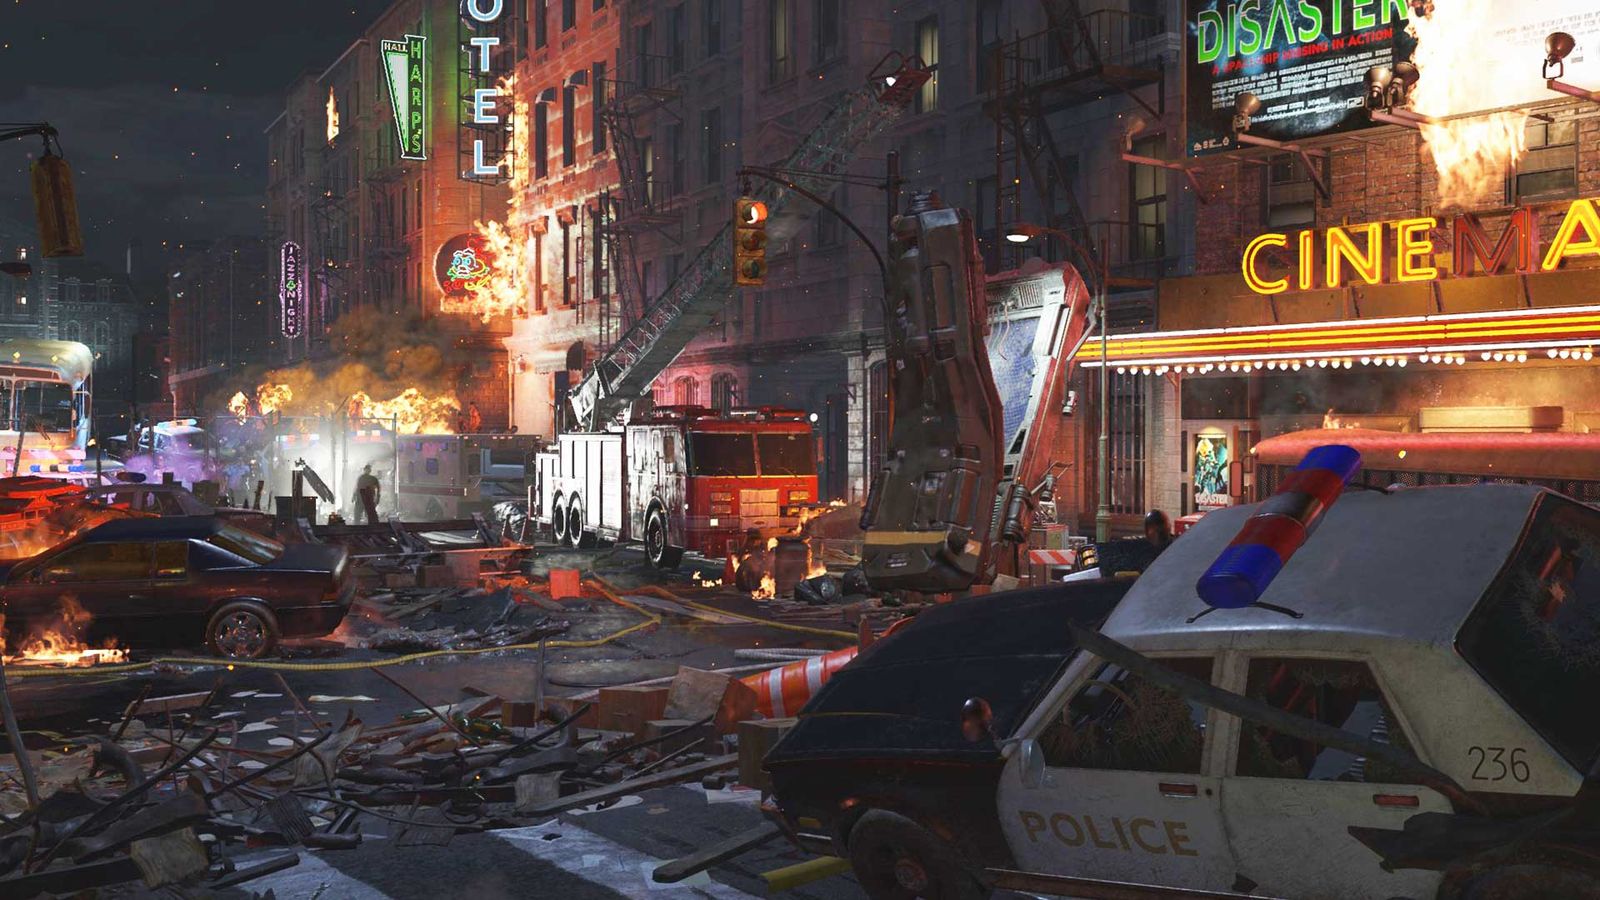 An image of Raccoon City from Resident Evil 2 and 3, in at number 6 in the Top 10 worst video game cities to live in.